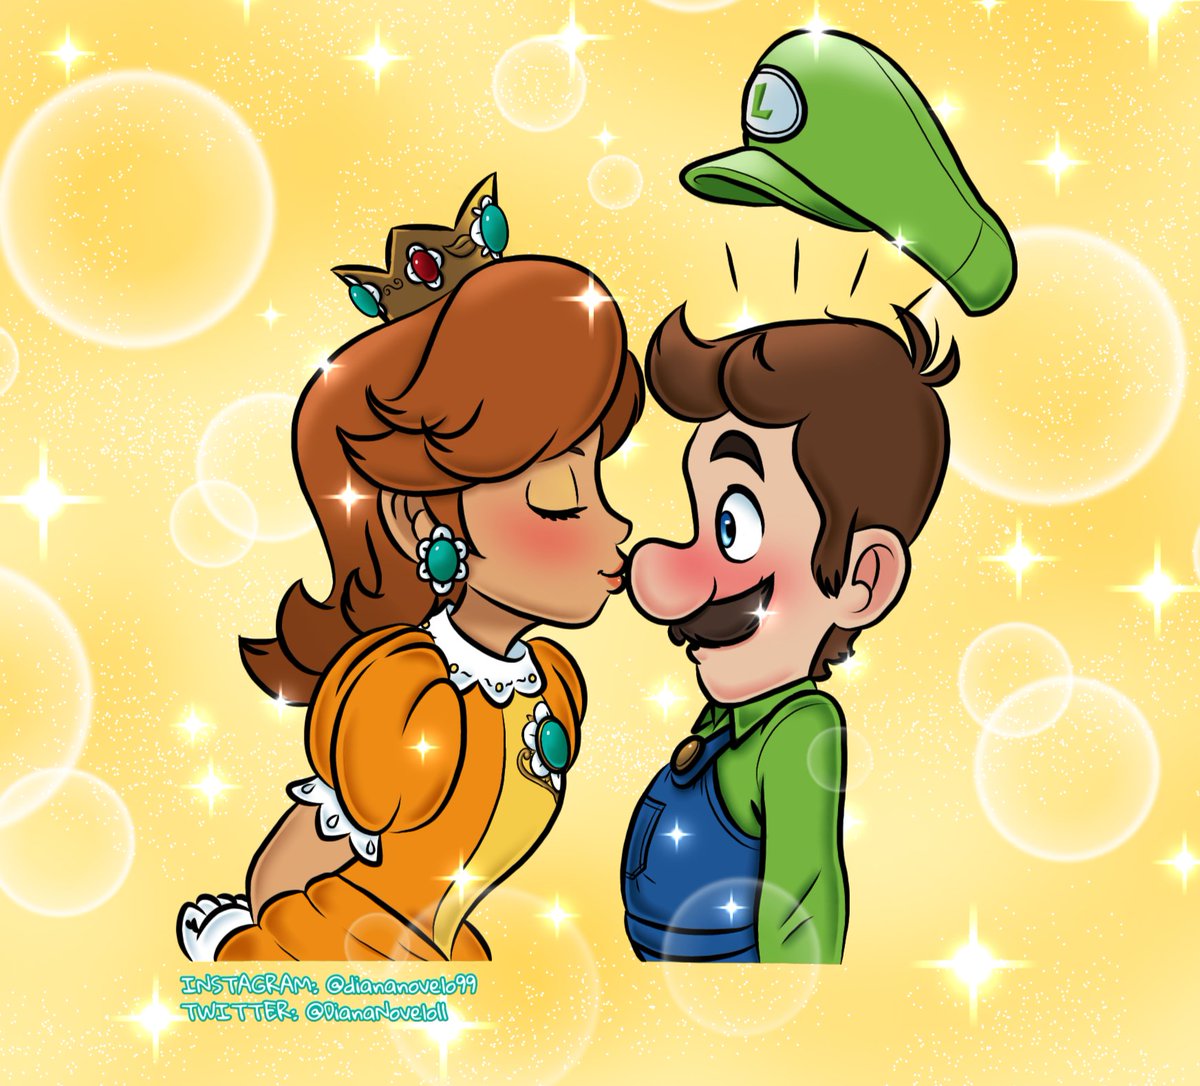 Luaisy for the soul 🧡🌼💚⭐

I wanted to post this along with the Mareach one for Valentine's Day, but I wasn't able to finish this one on time, so here it is now! 

#TheSuperMarioBrosMovie #MarioMovie #Luigi #Luaisy #PrincessDaisy #SuperMarioBrosFanart